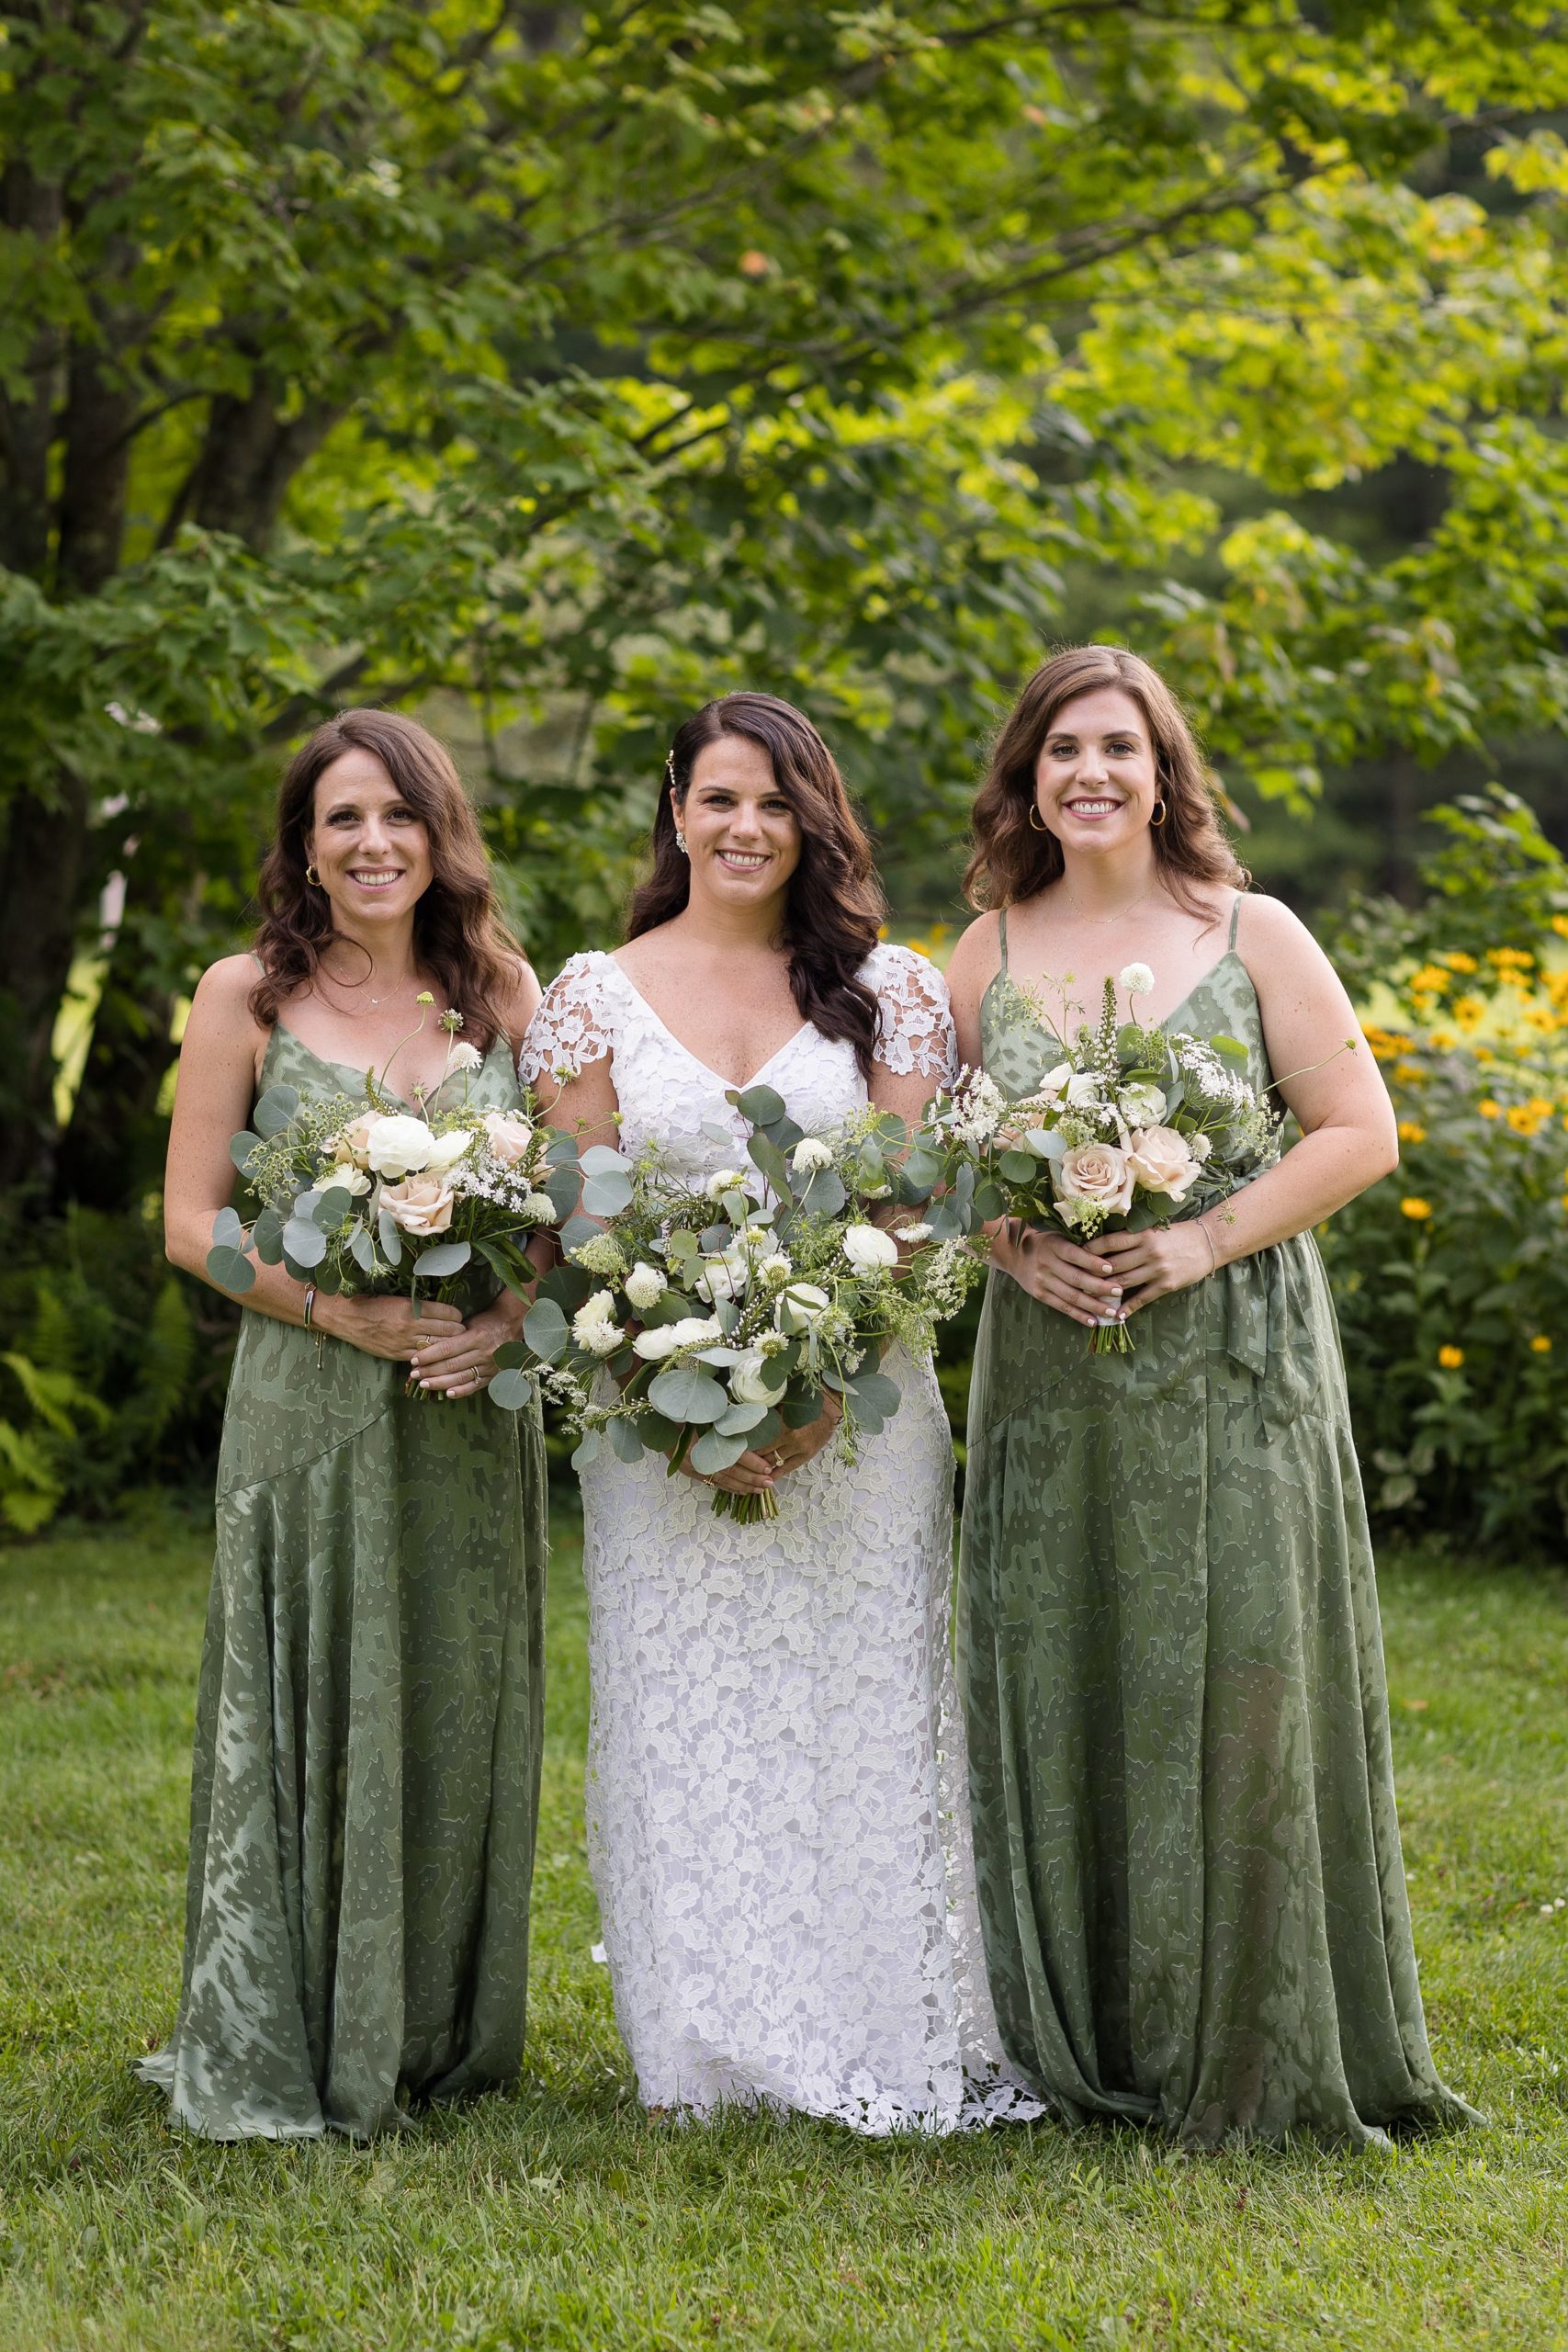 Bride and bridesmaid portrait for summer wedding at the Stowehof Inn